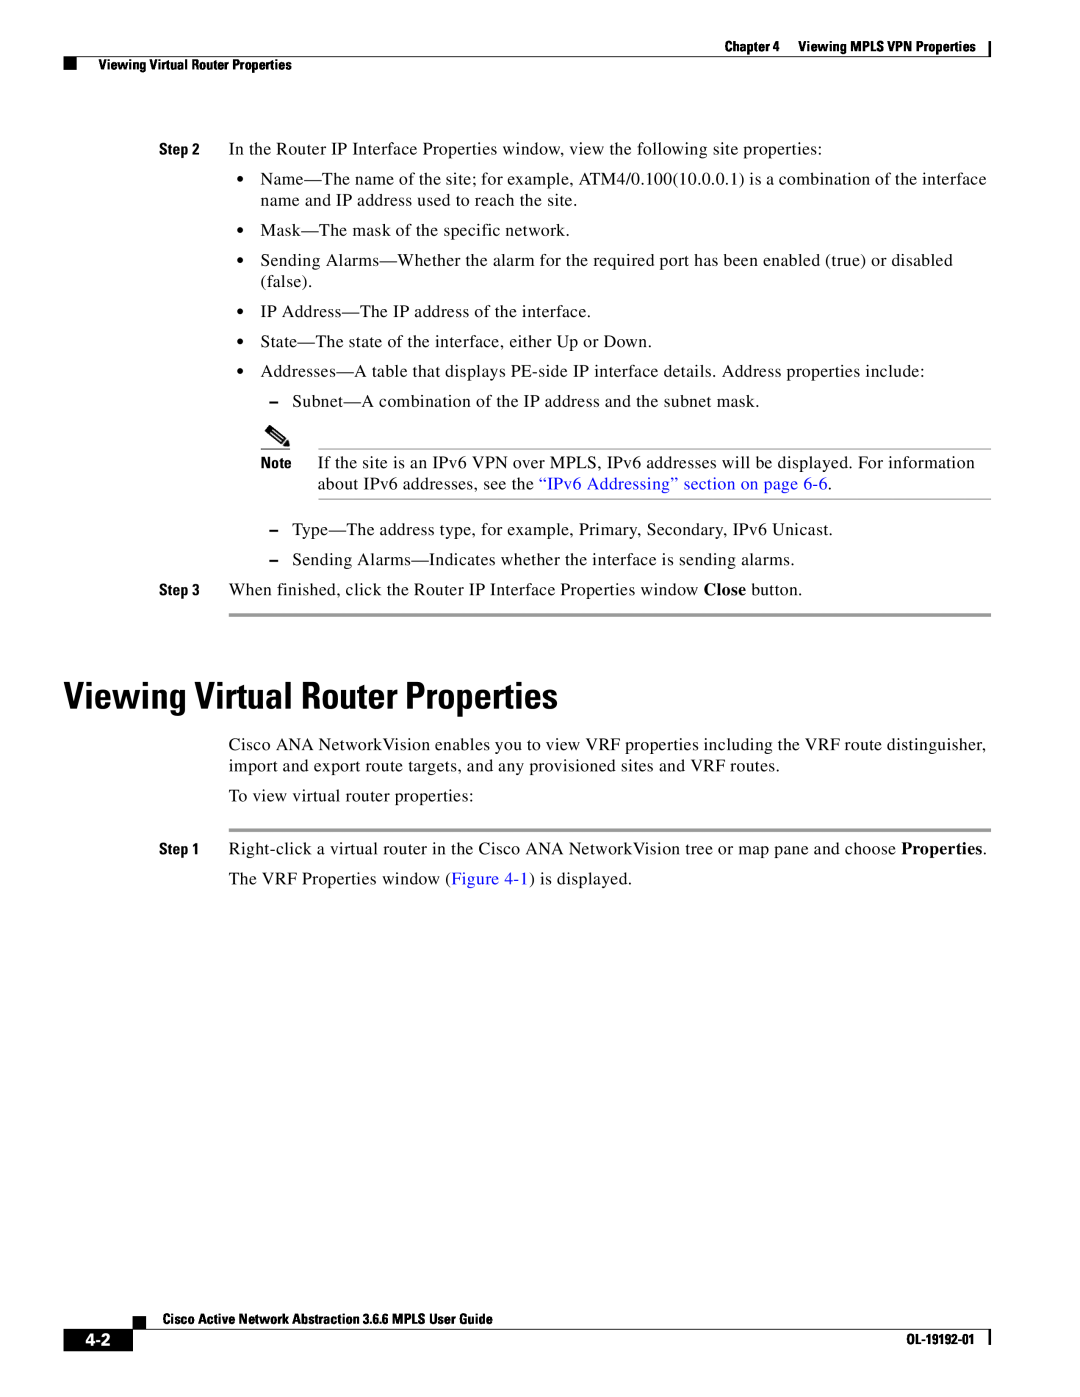 Cisco Systems 3.6.6 manual Viewing Virtual Router Properties 